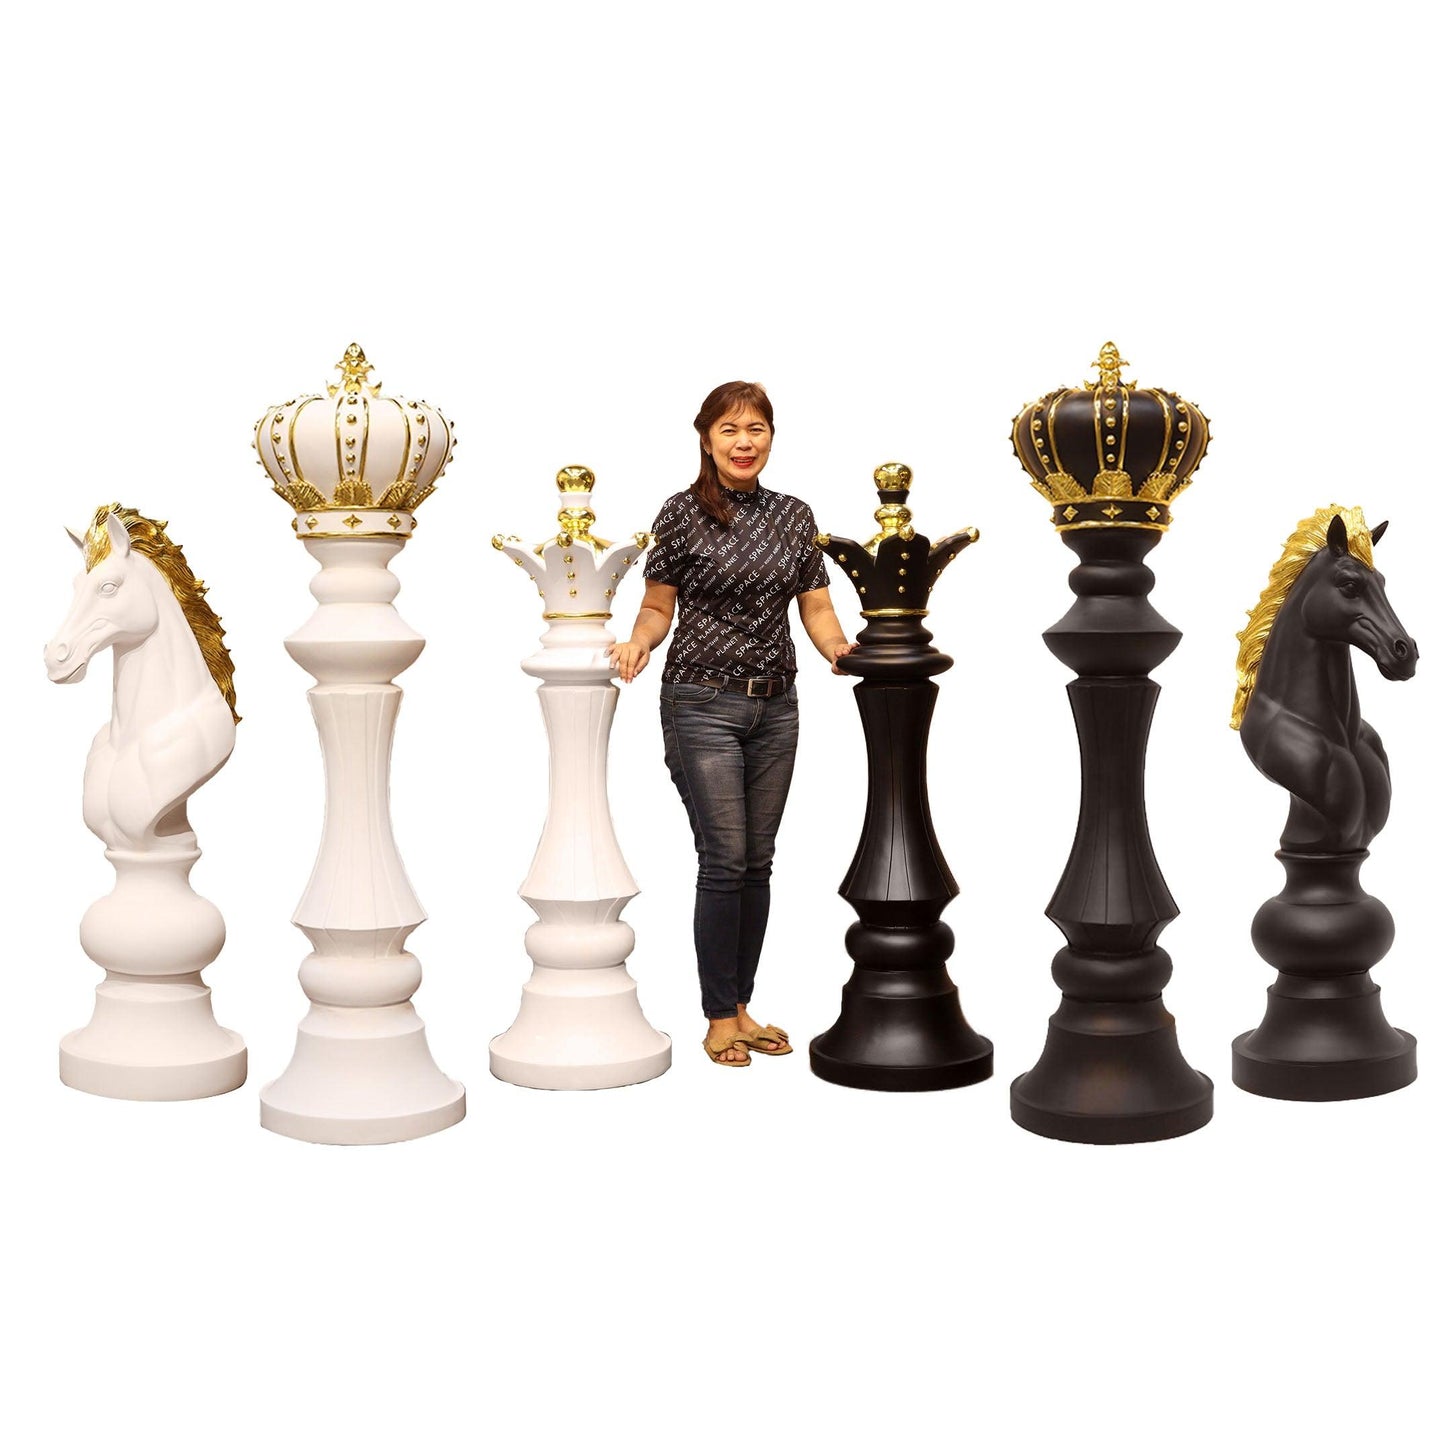 White Chess Set of 3 Statues - LM Treasures Prop Rentals 